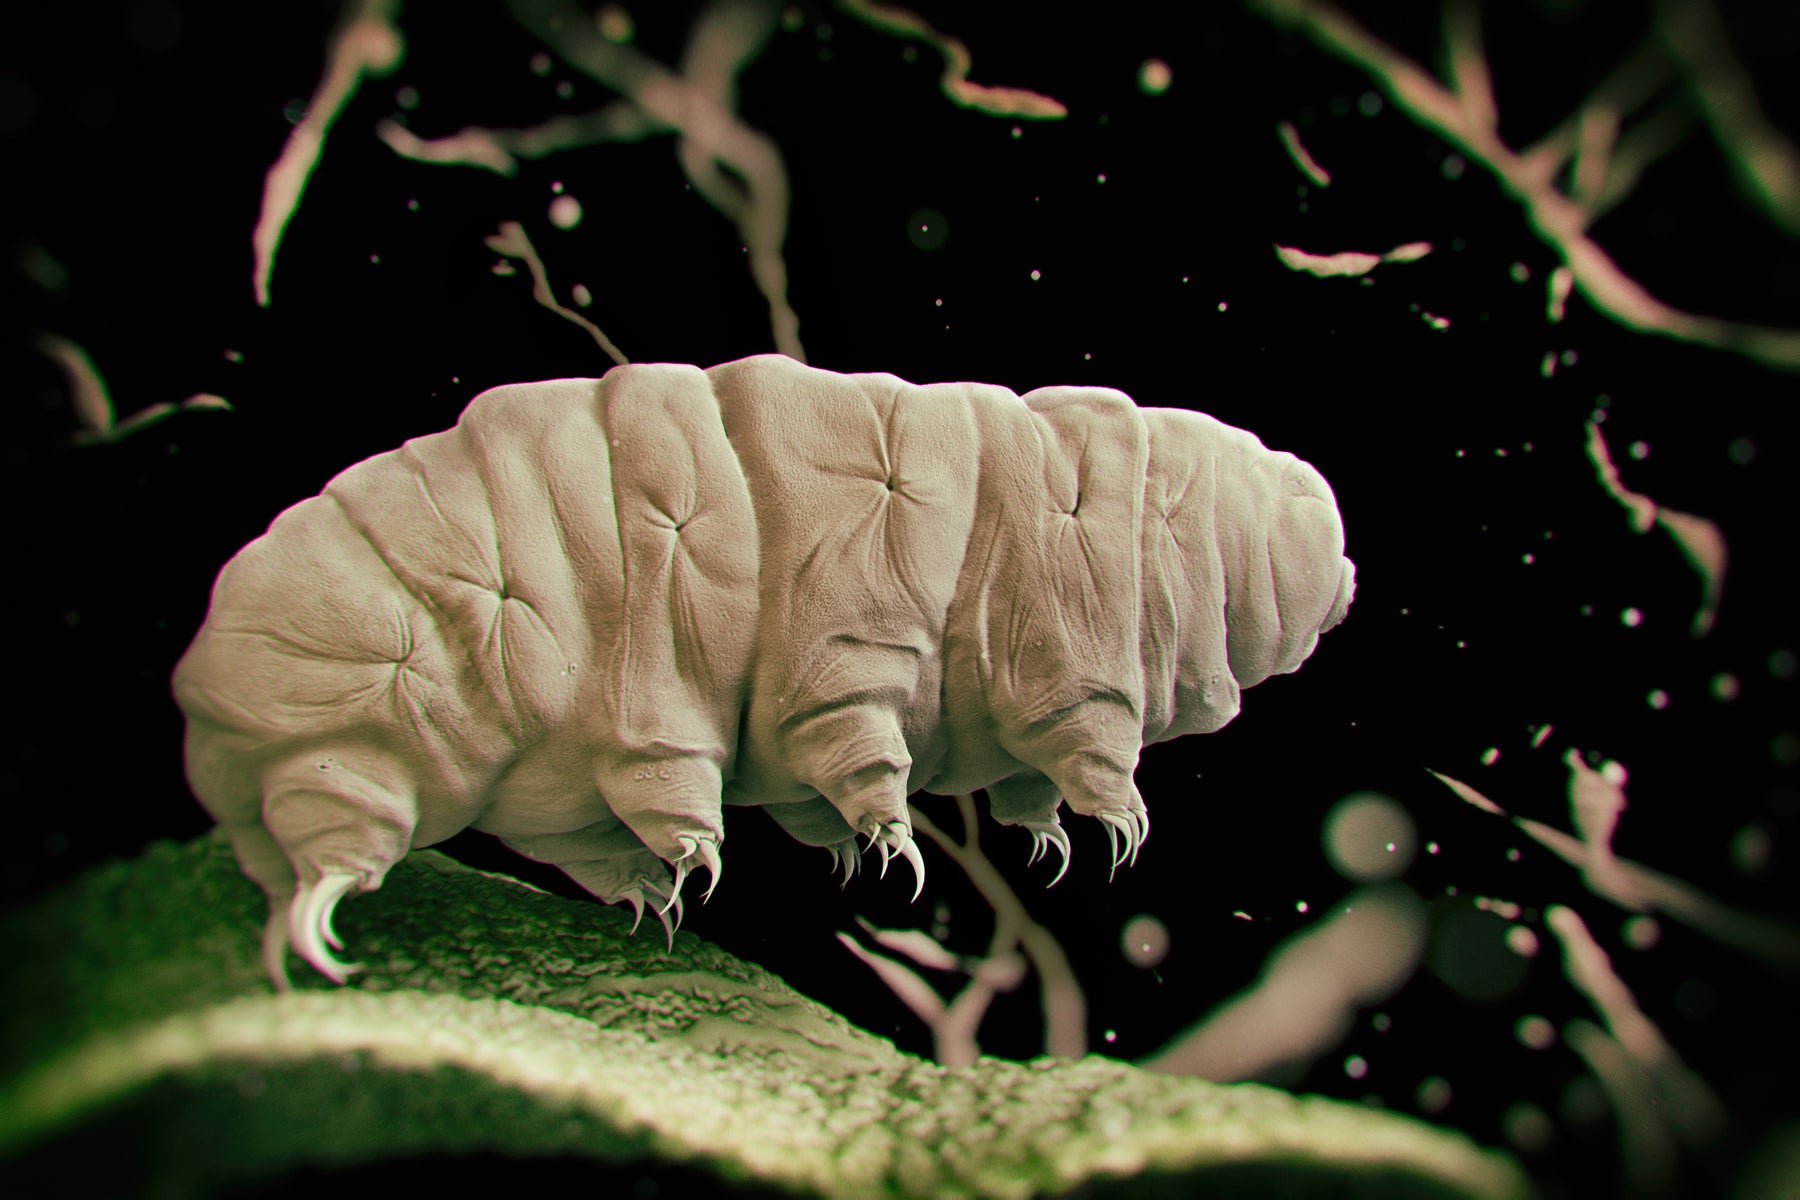 From Moss to Microscope: A Step-by-Step Guide to Finding and Viewing Tardigrades